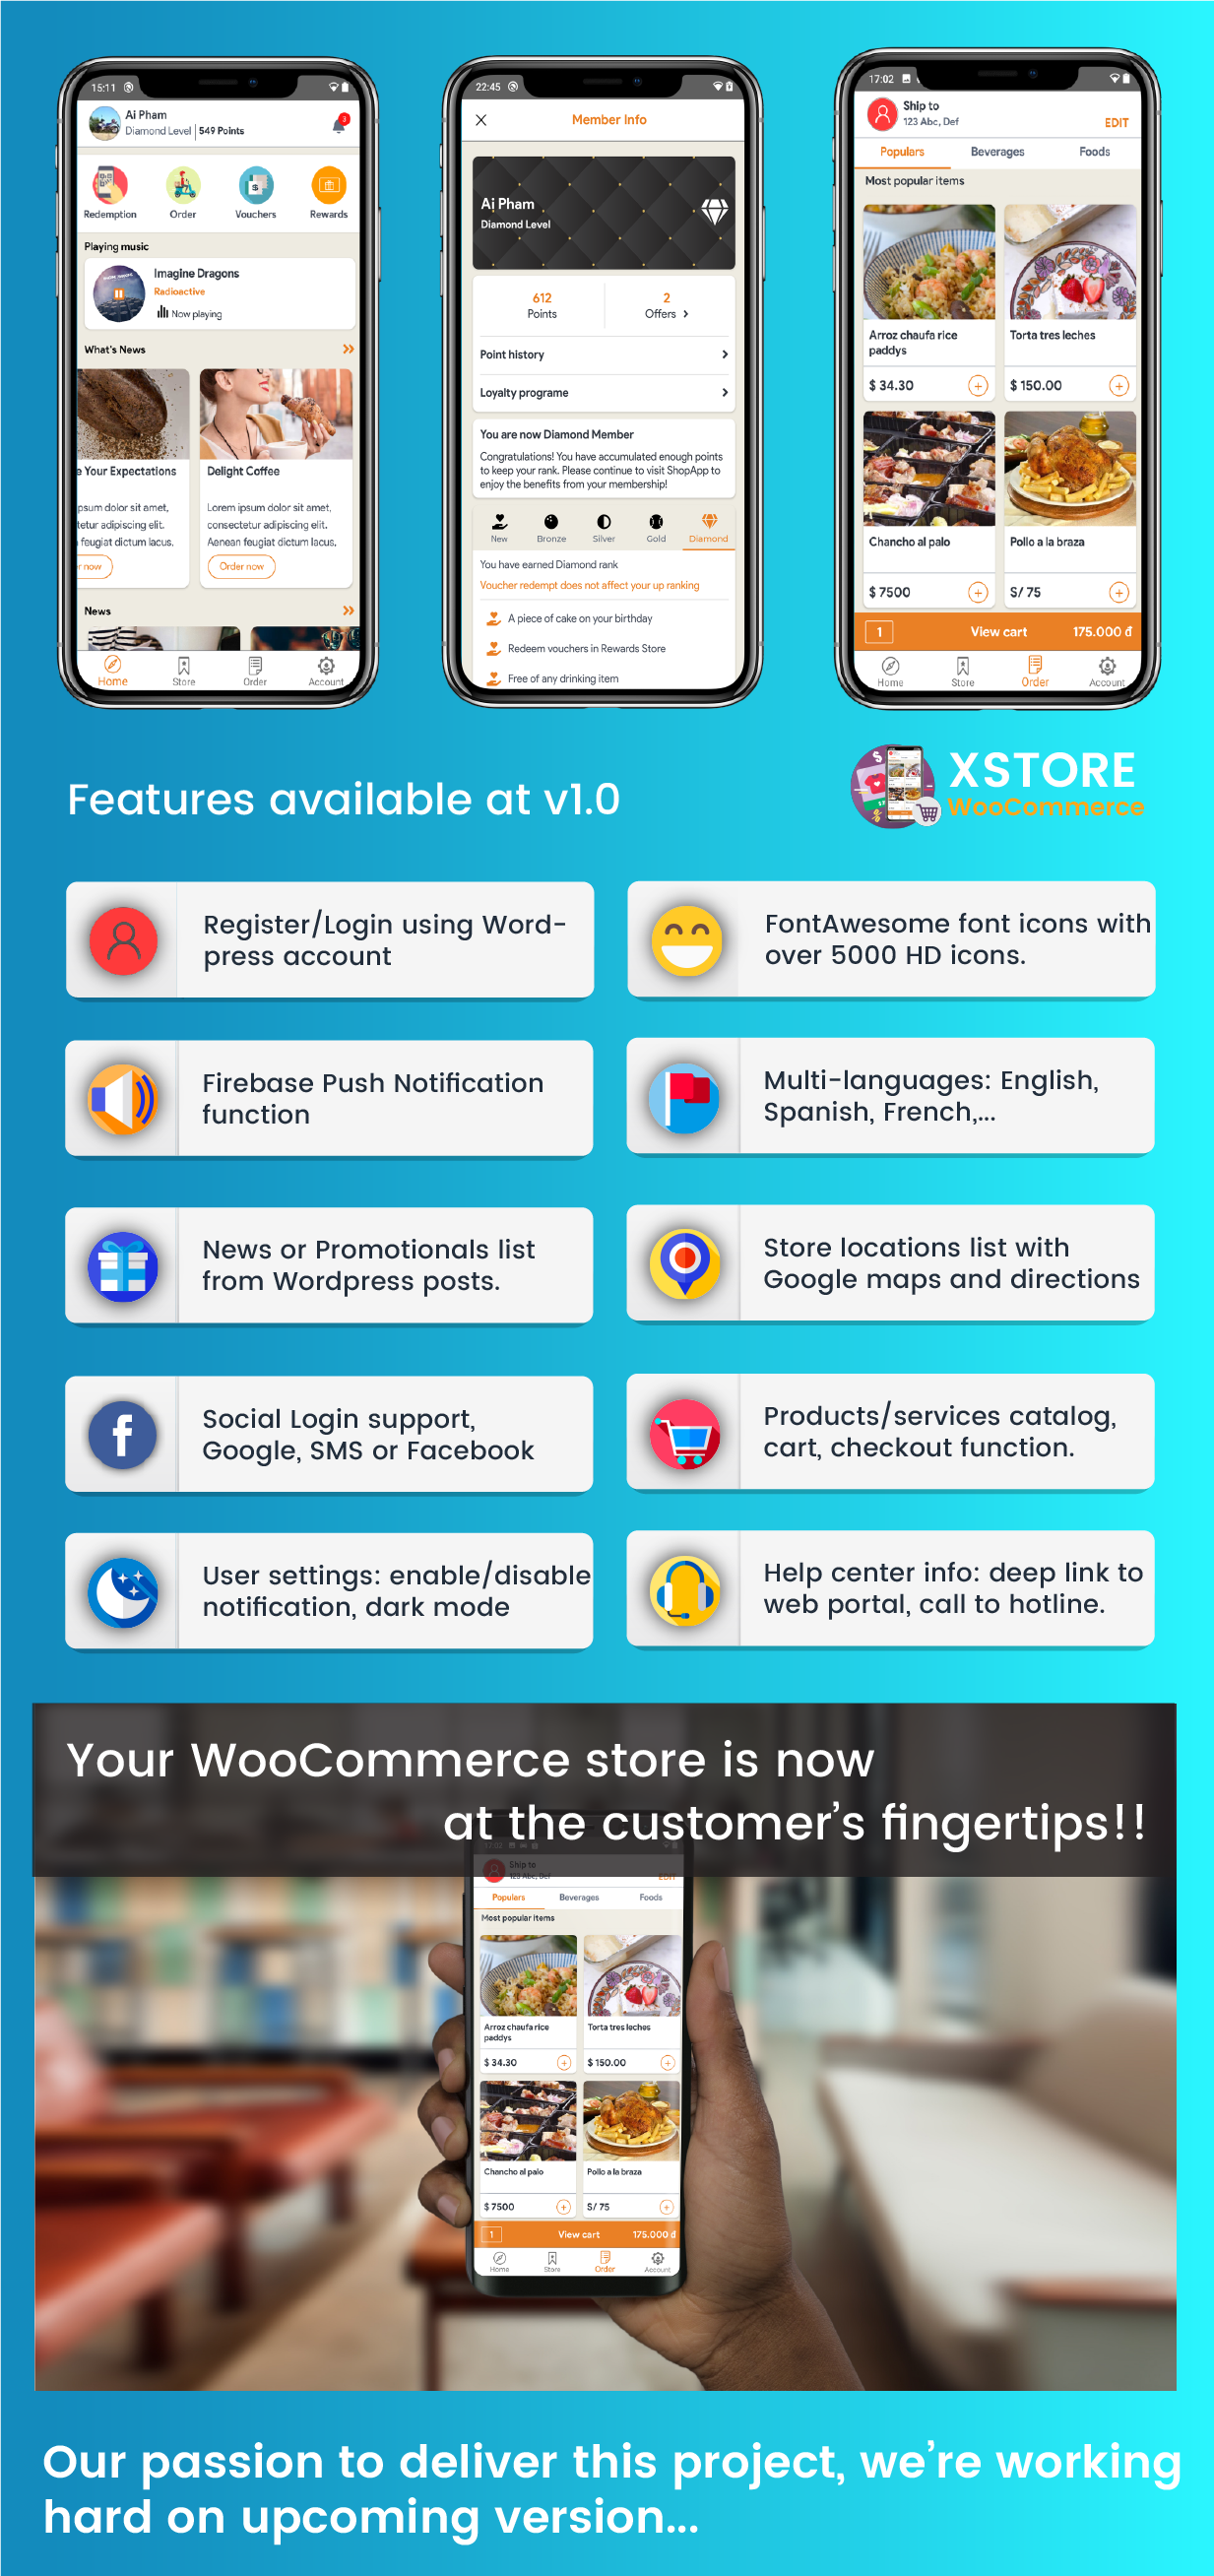 XStore - Universal mobile store application for WooCommerce - 3